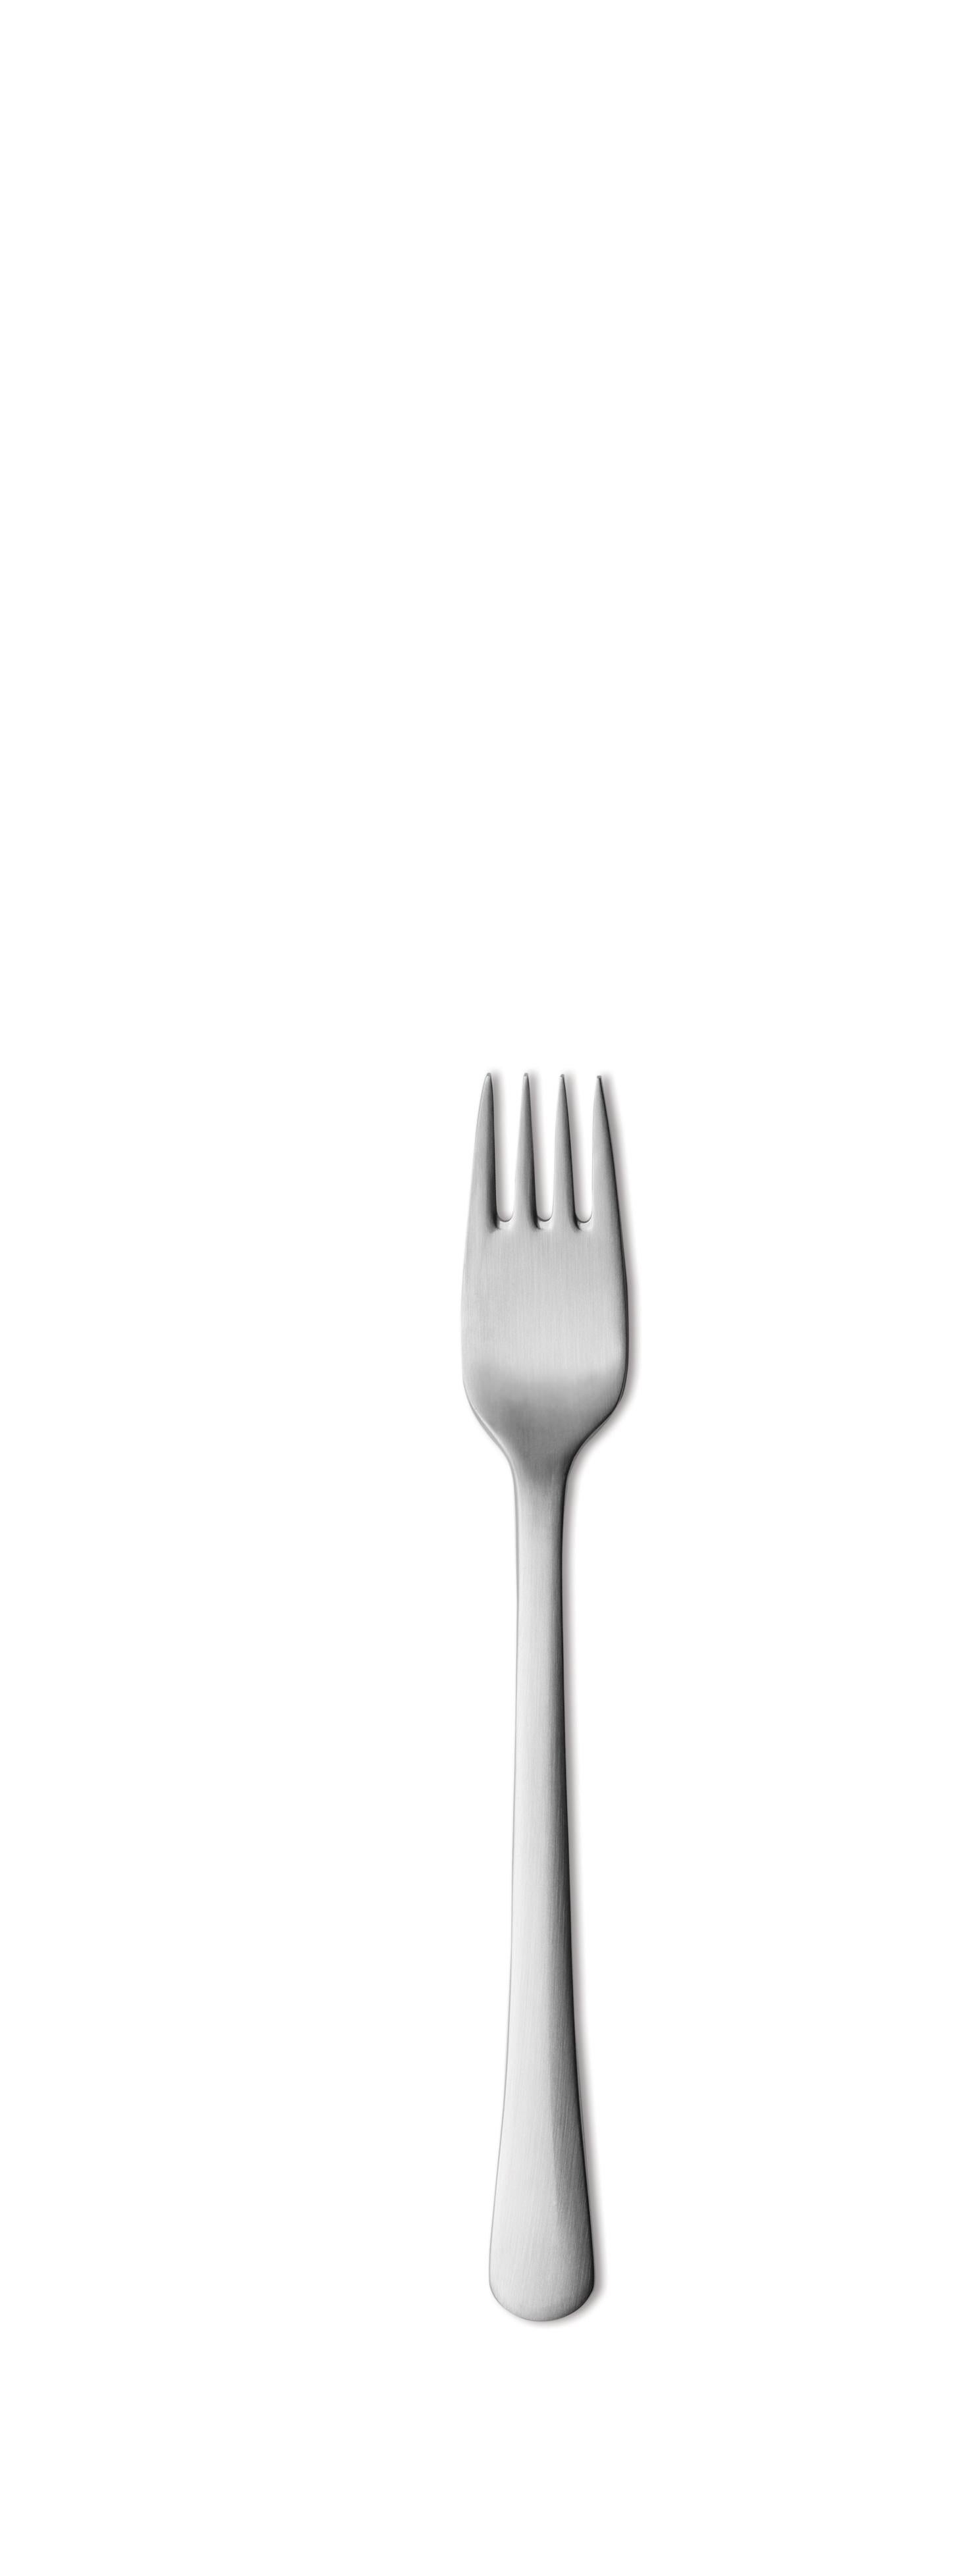 Georg Jensen Copenhagen Child Pastry Fork in Stainless Steel by Grethe Meyer In New Condition For Sale In New York, NY